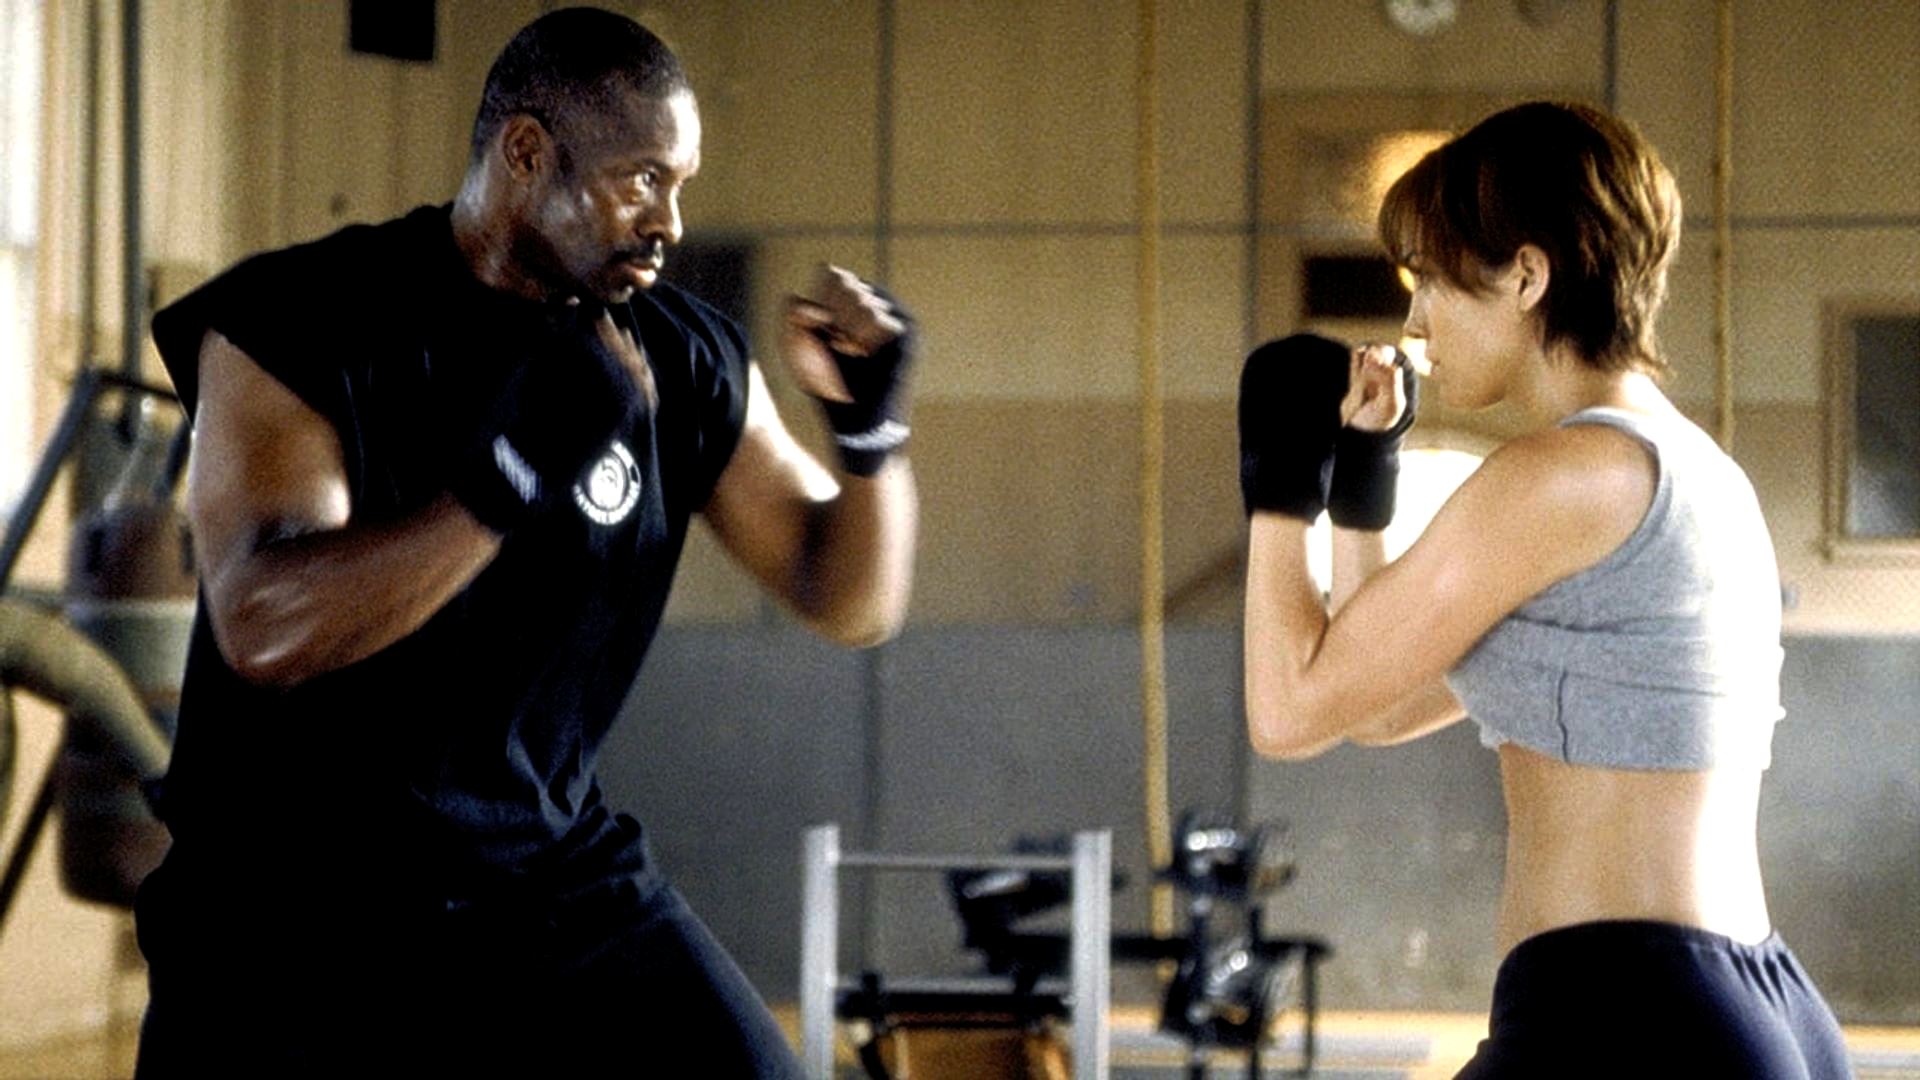 Jennifer Lopez takes self-defence classes from Bruce A. Young in Enough (2002)